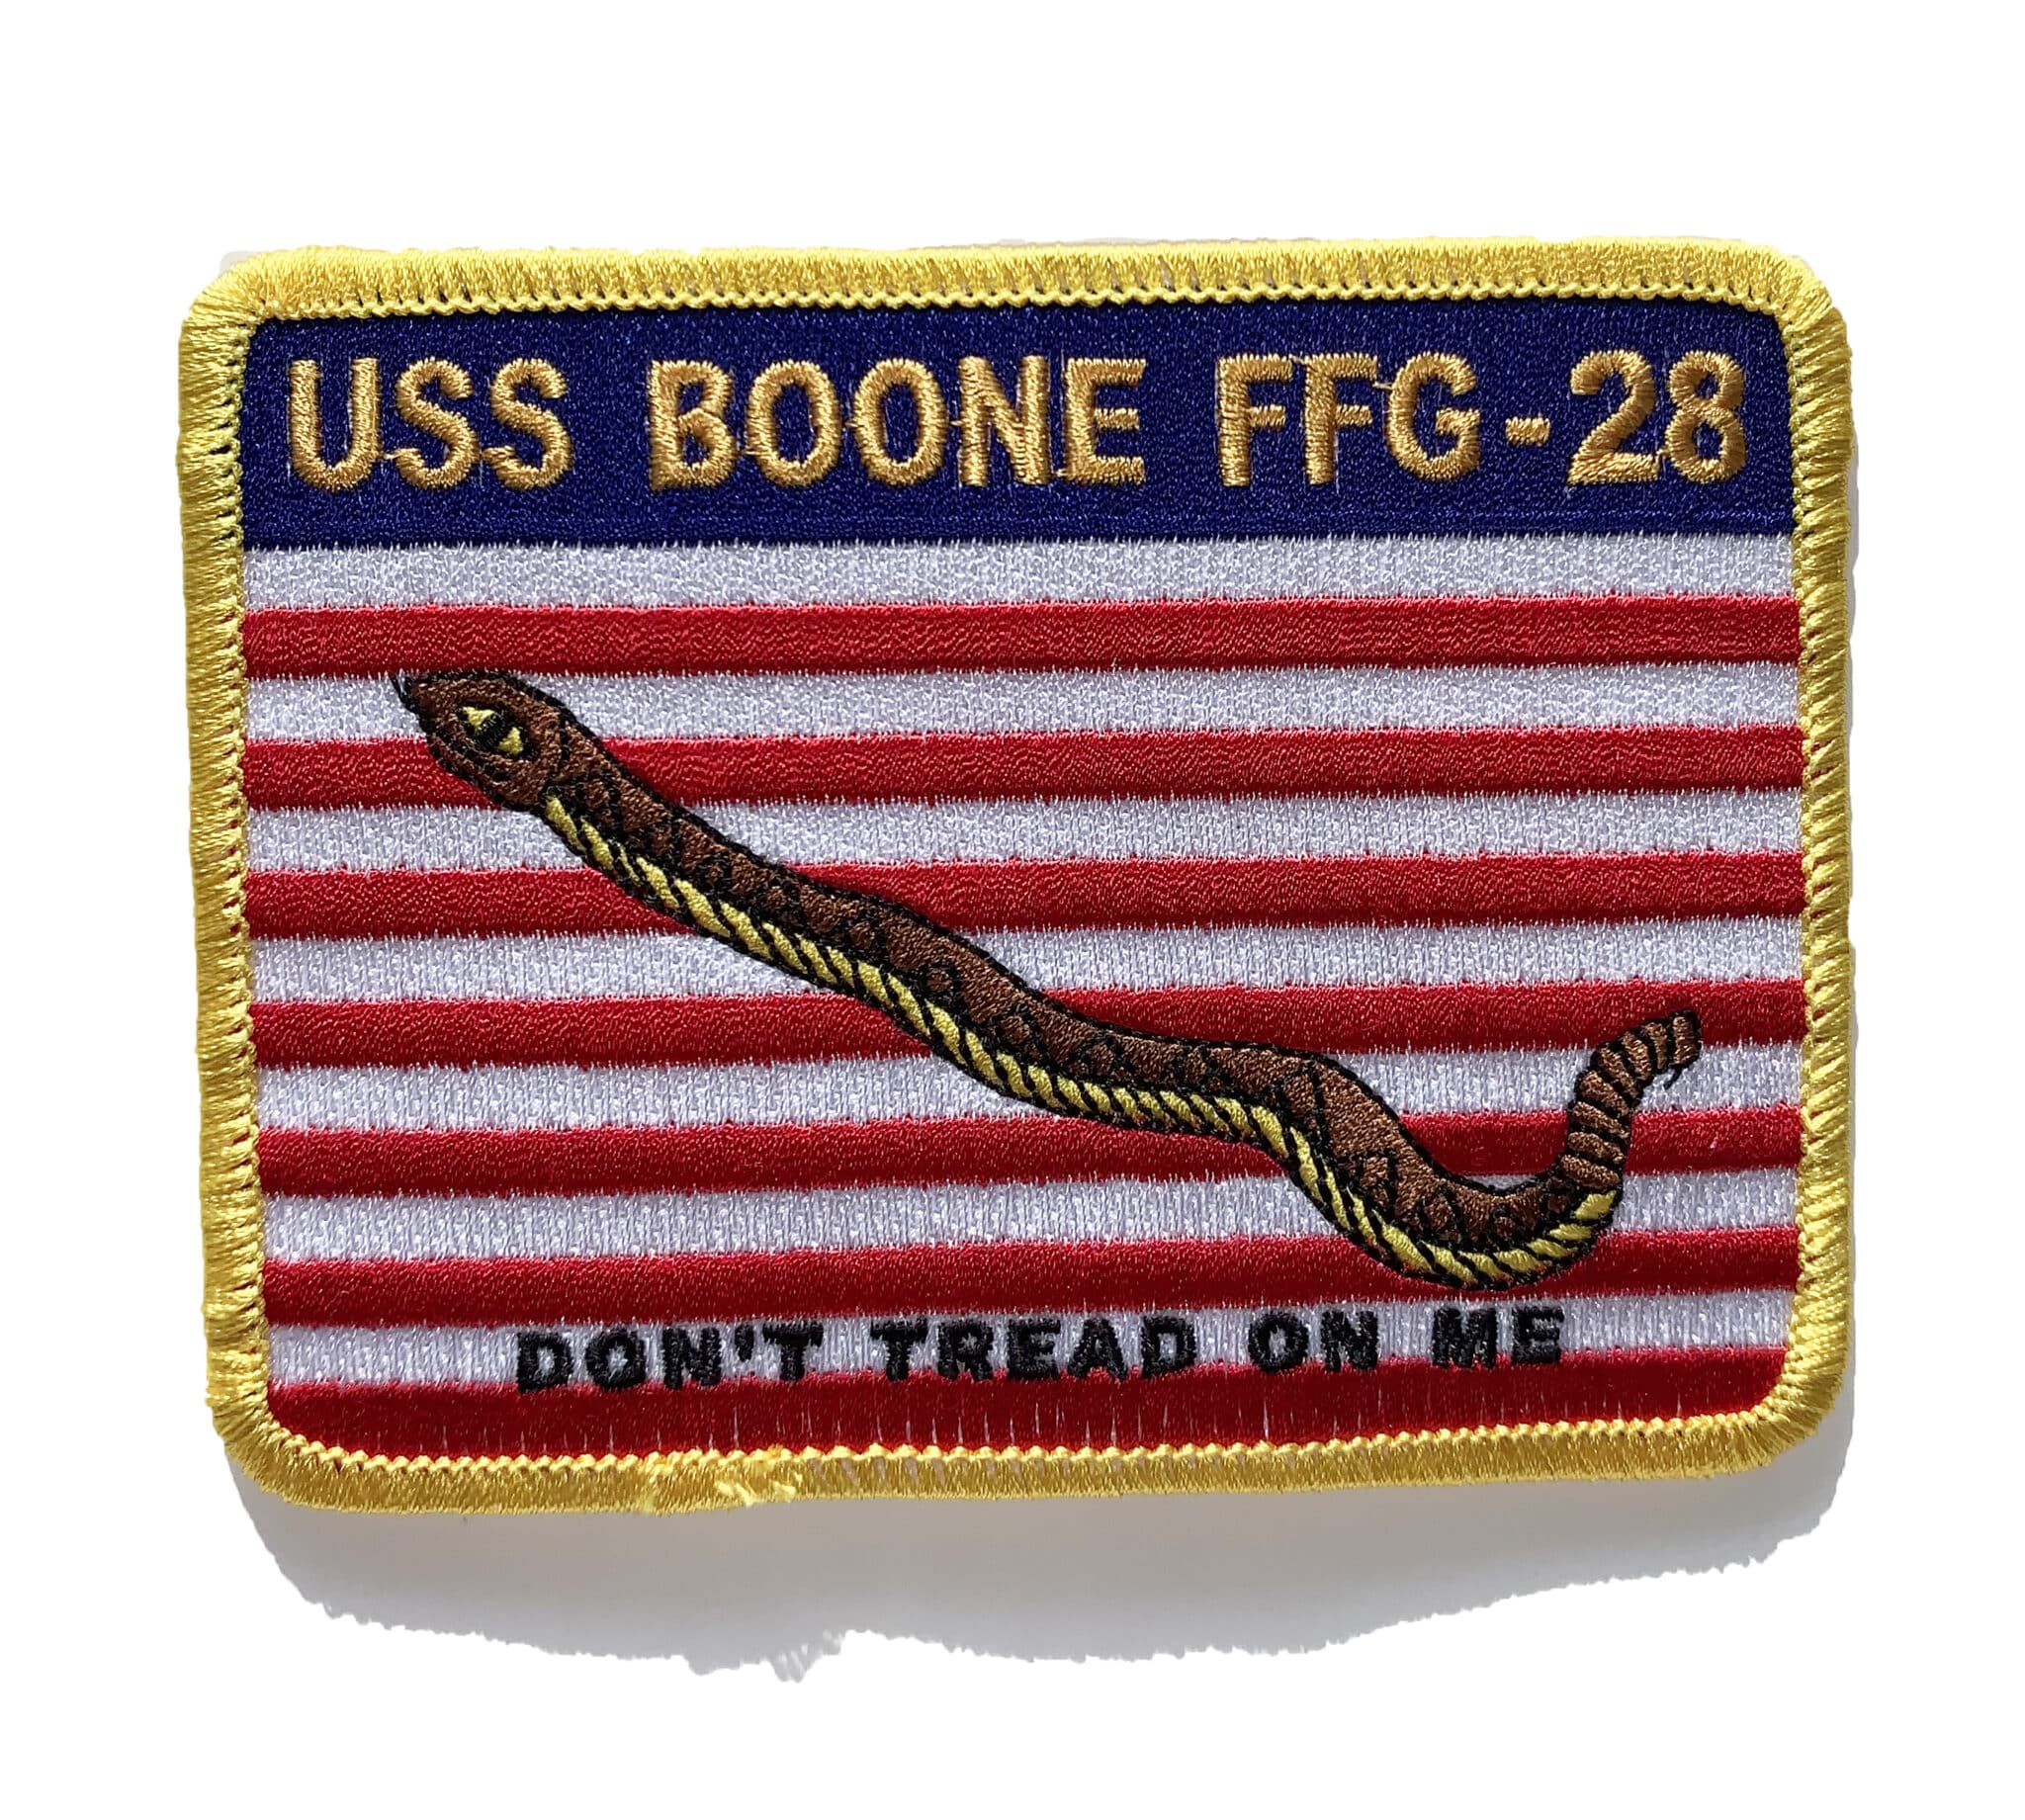 USS BOONE FFG-28 Patch – Sew On